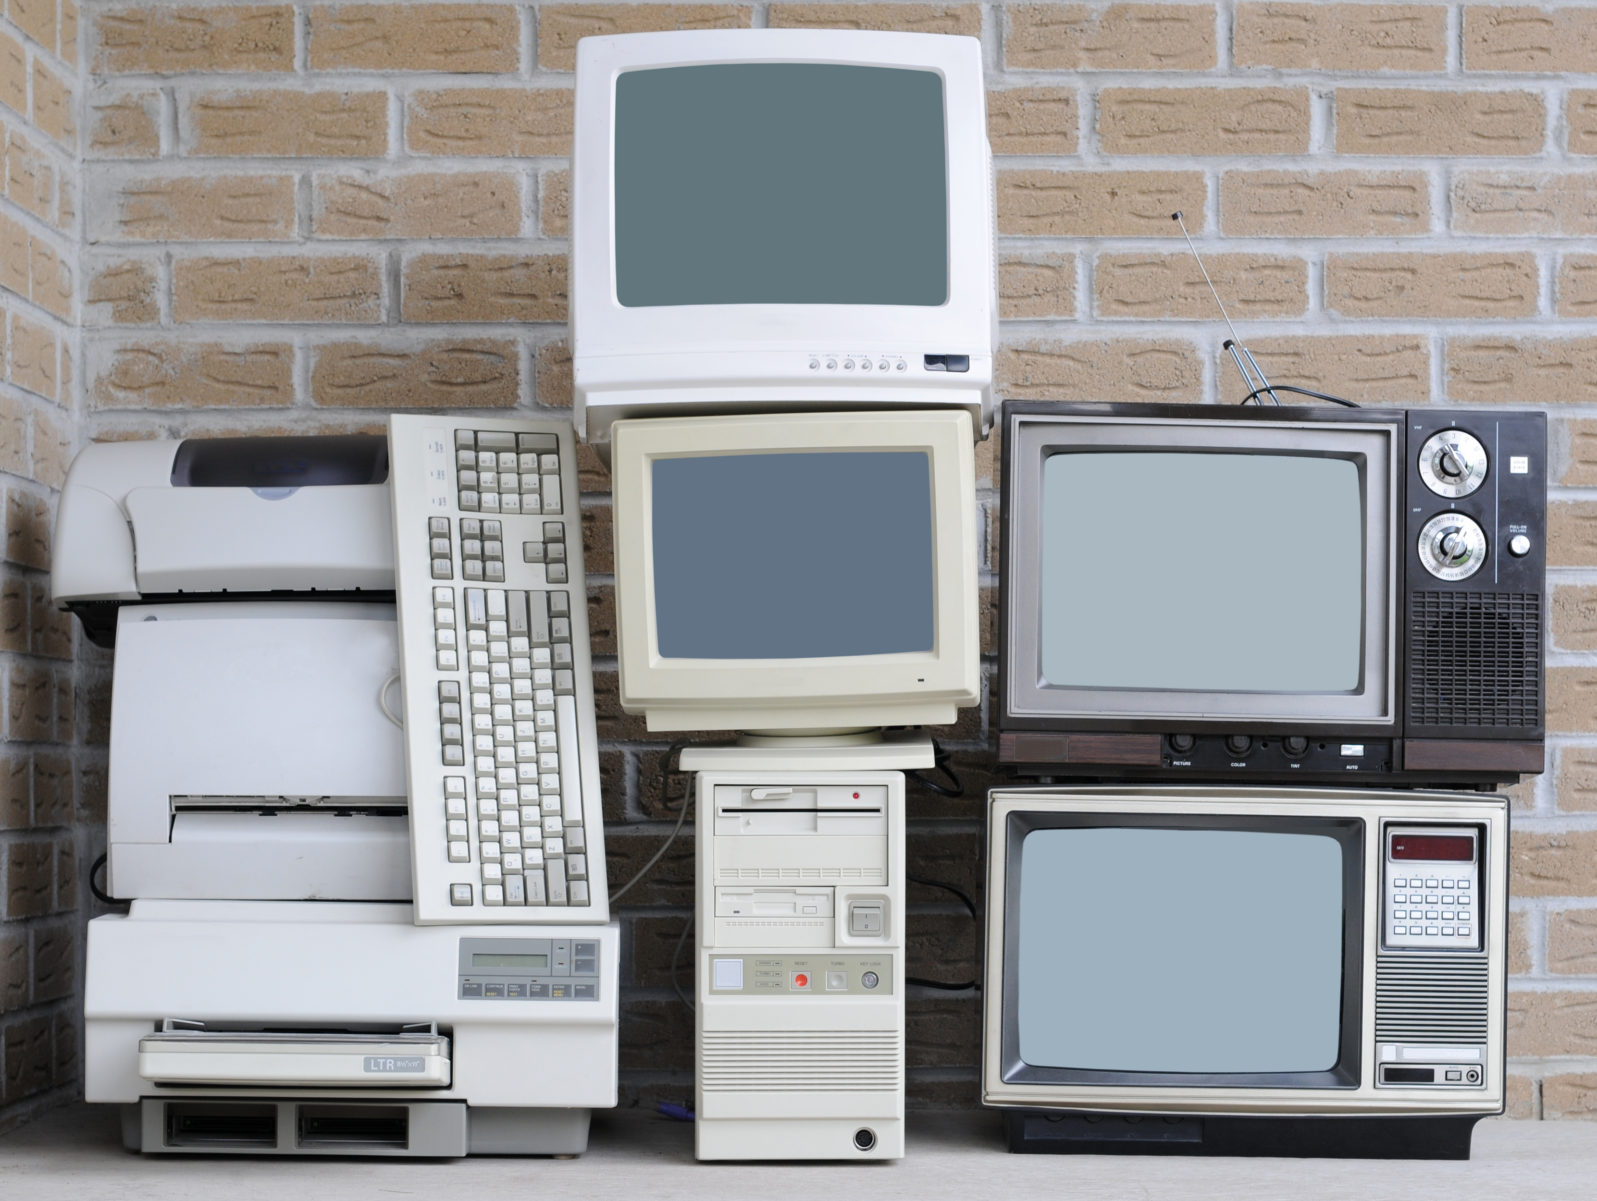 Old electronics / technological equipment